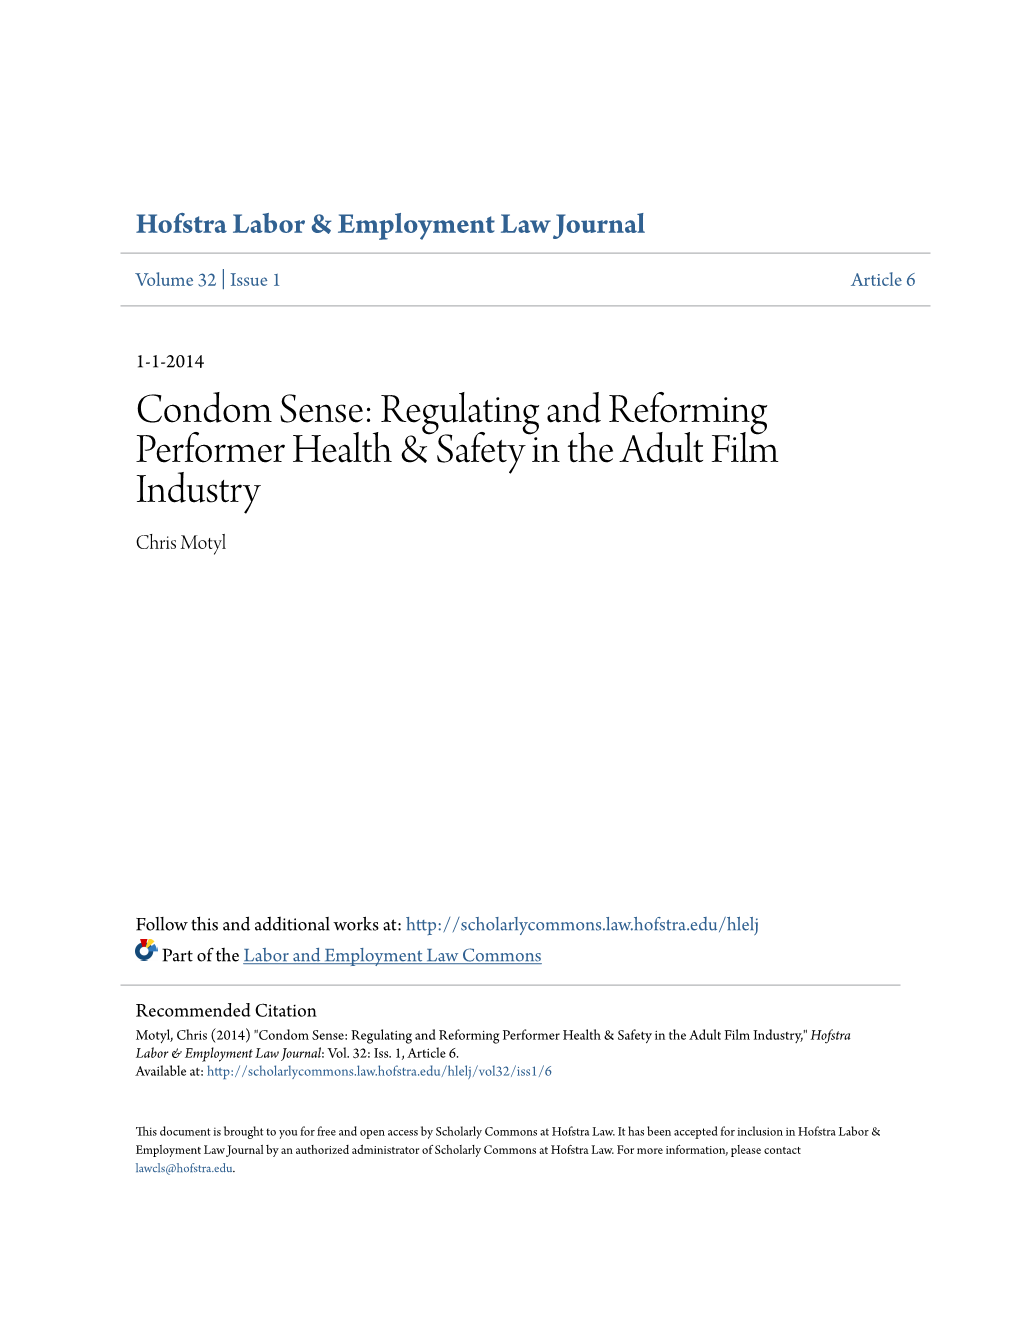 Condom Sense: Regulating and Reforming Performer Health & Safety in the Adult Film Industry Chris Motyl